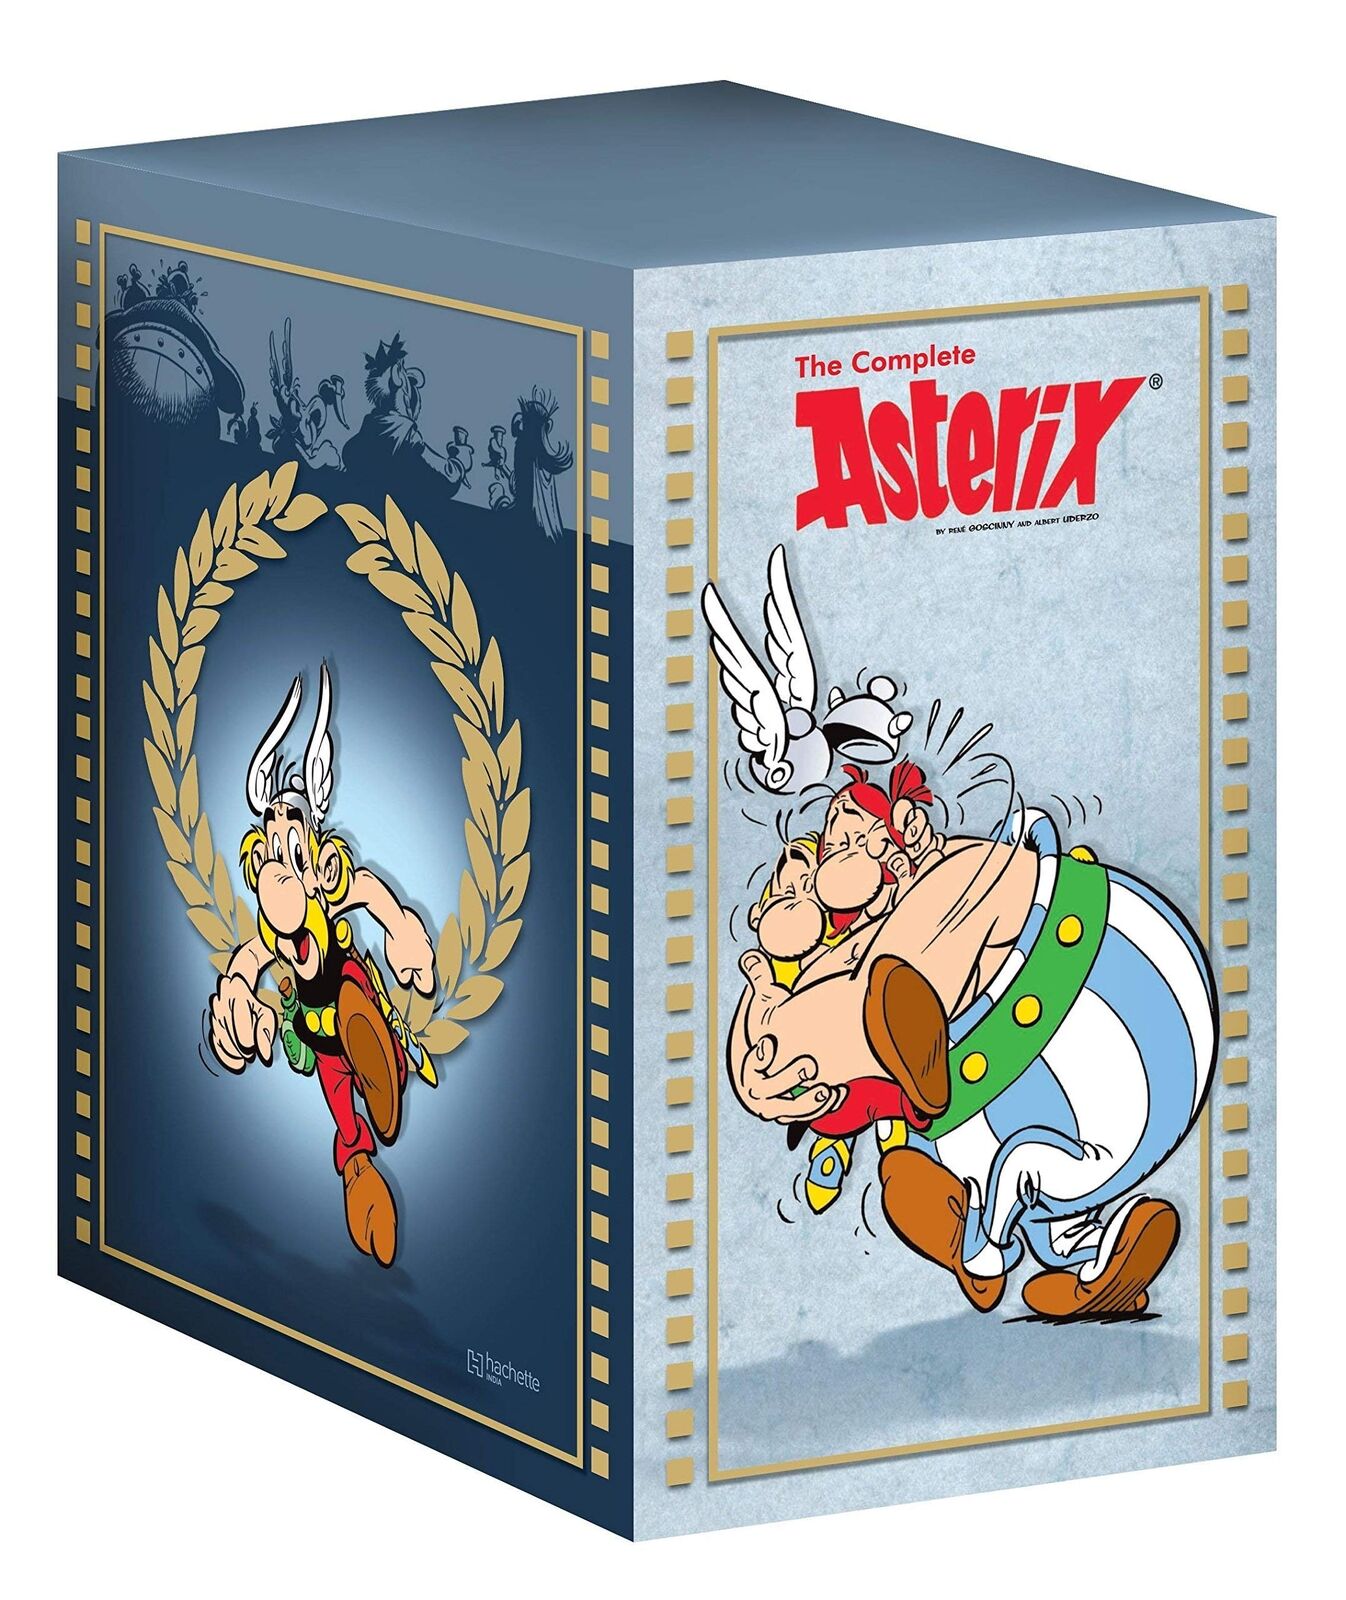 The Complete Asterix 39 Books Collection Box Set By Rene Goscinny NEW Colored